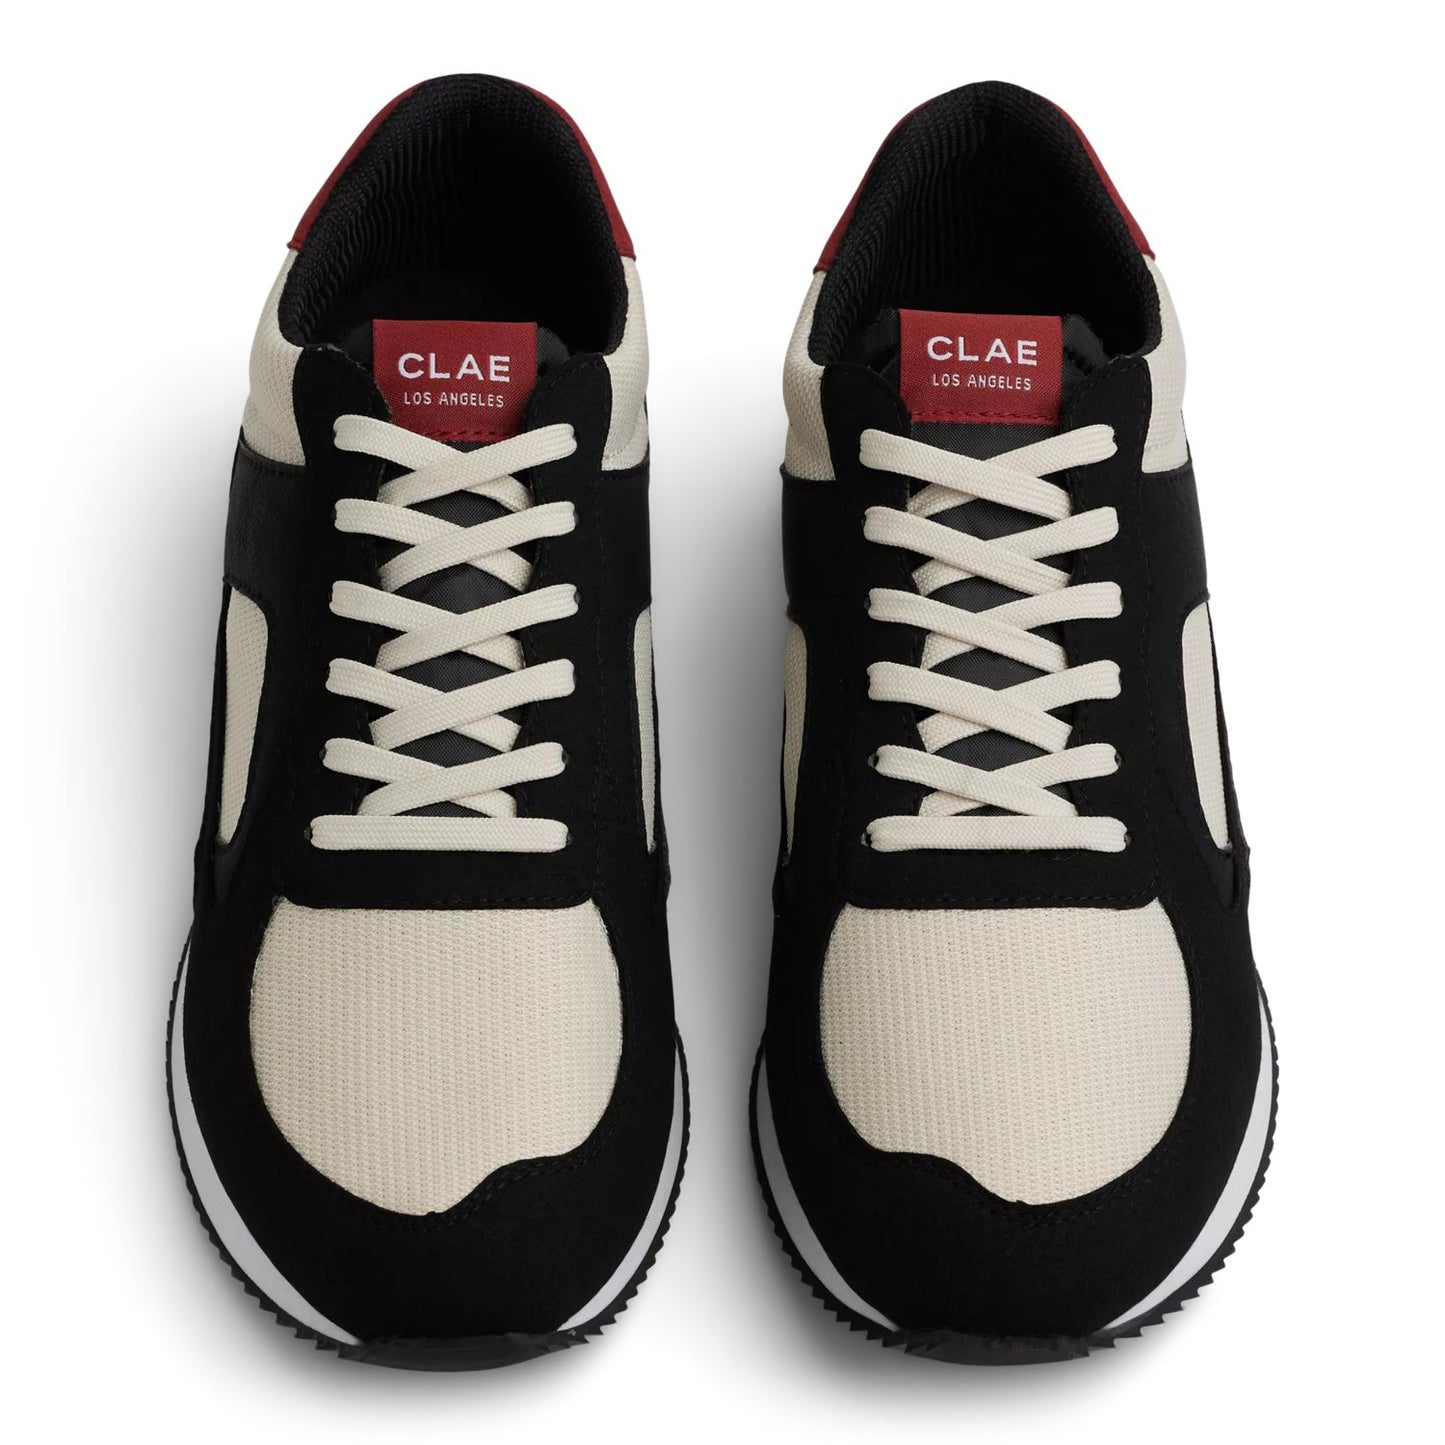 Edson Low-Top Trainers